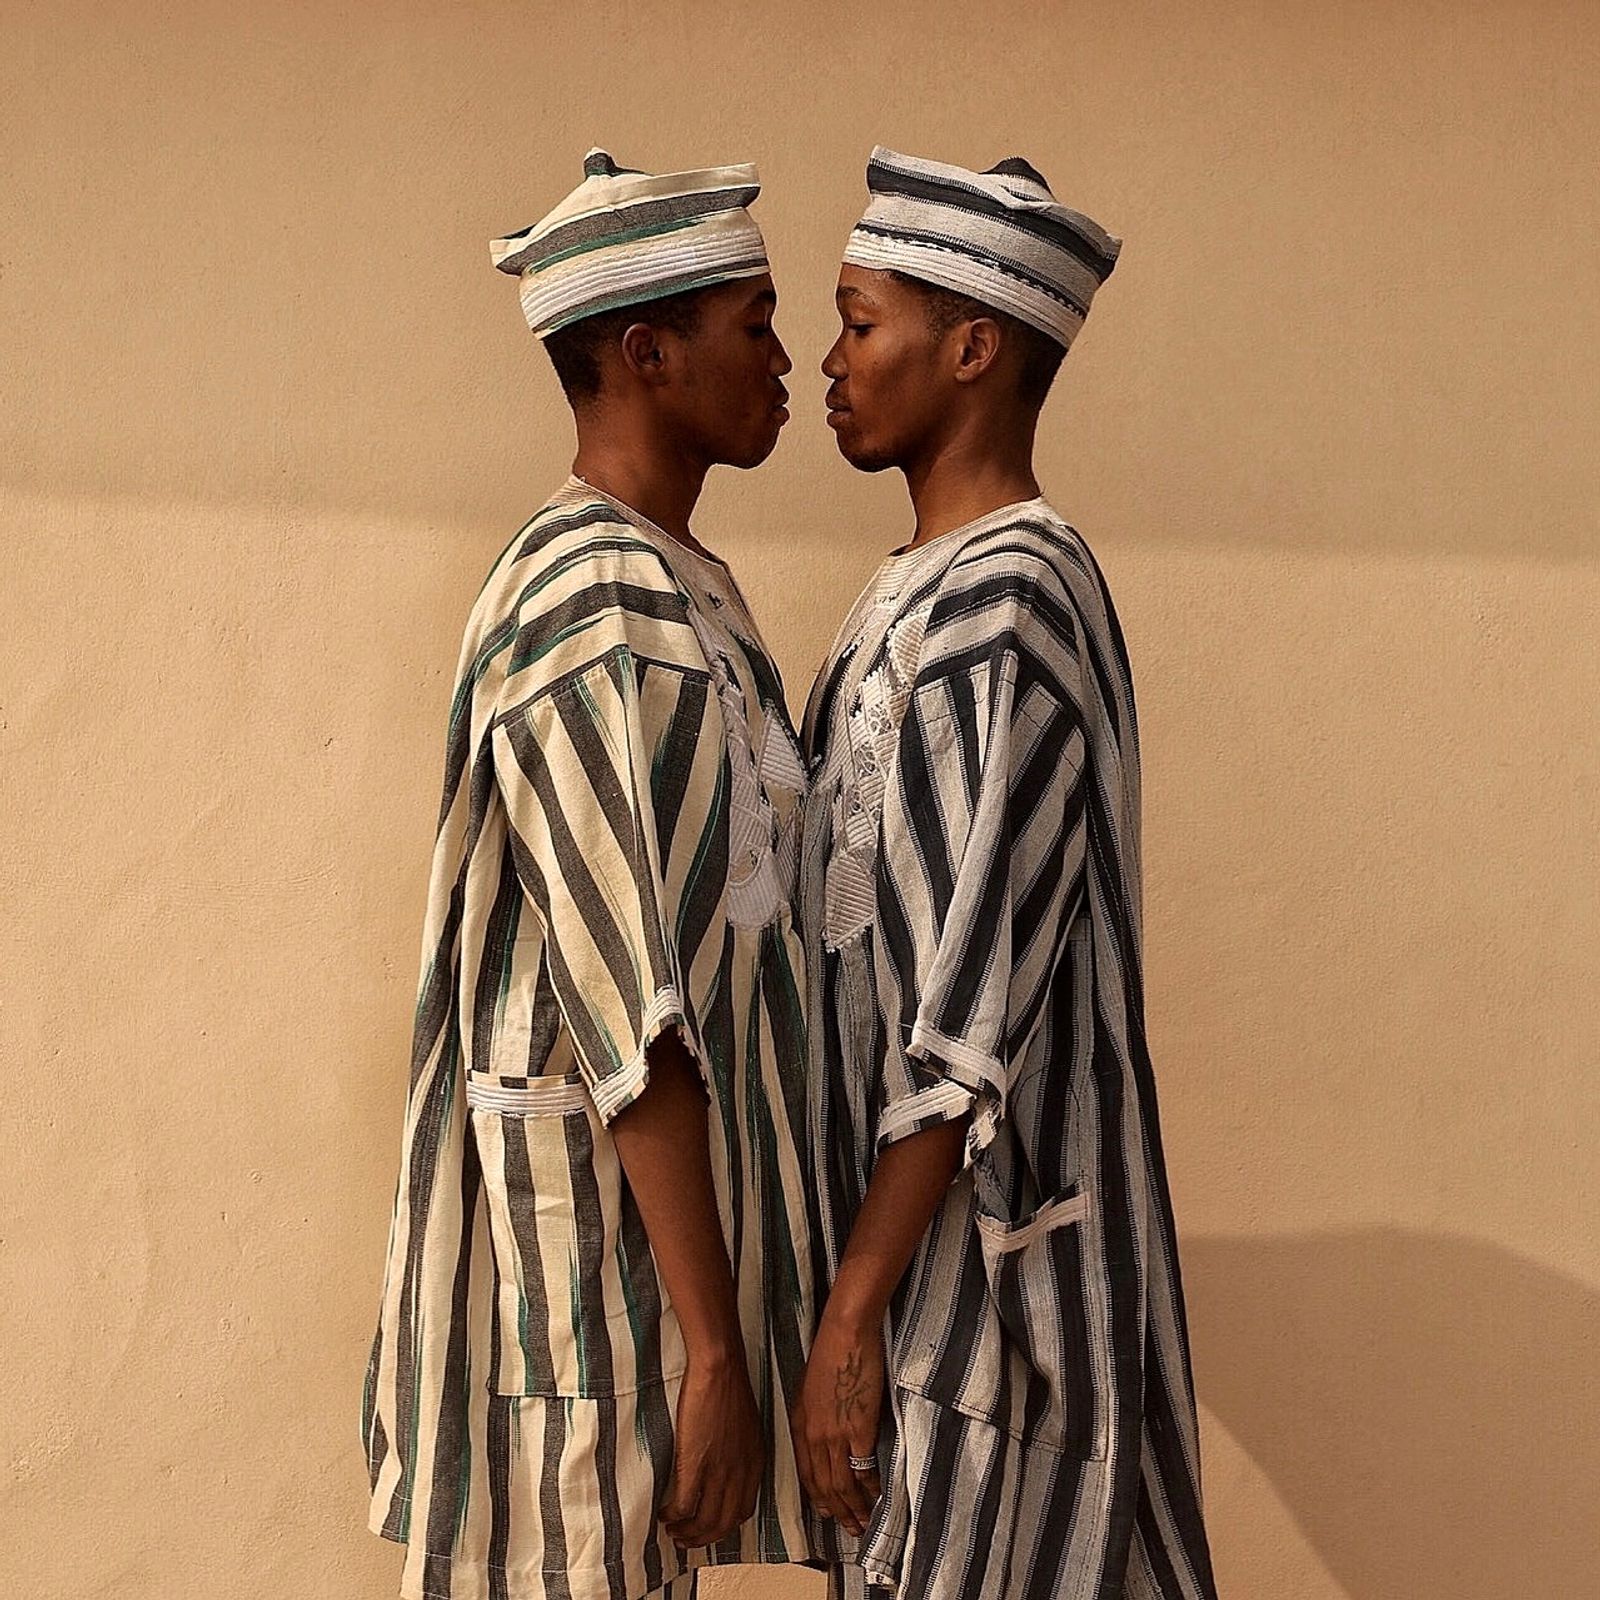 © Nwando Ebeledike - This photo was taken in Cotonou, Benin Republic and is a photo of twin brothers